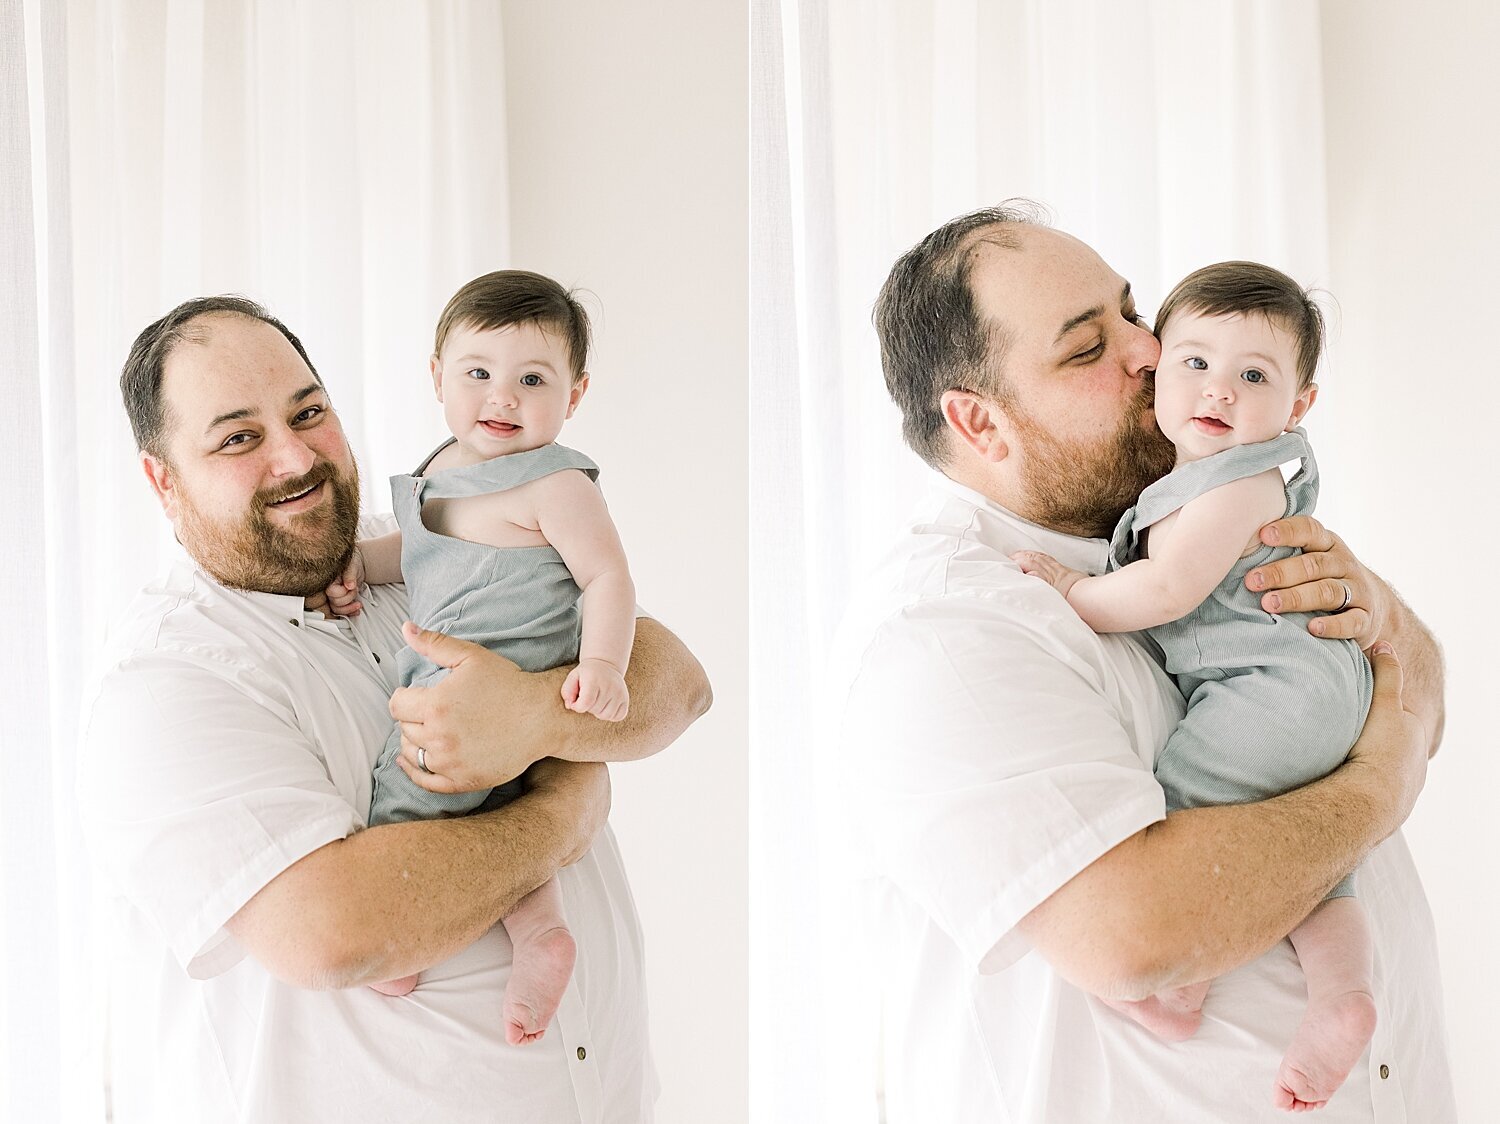 Father-son photos taken by Ambre Williams Photography in Newport Beach, CA.